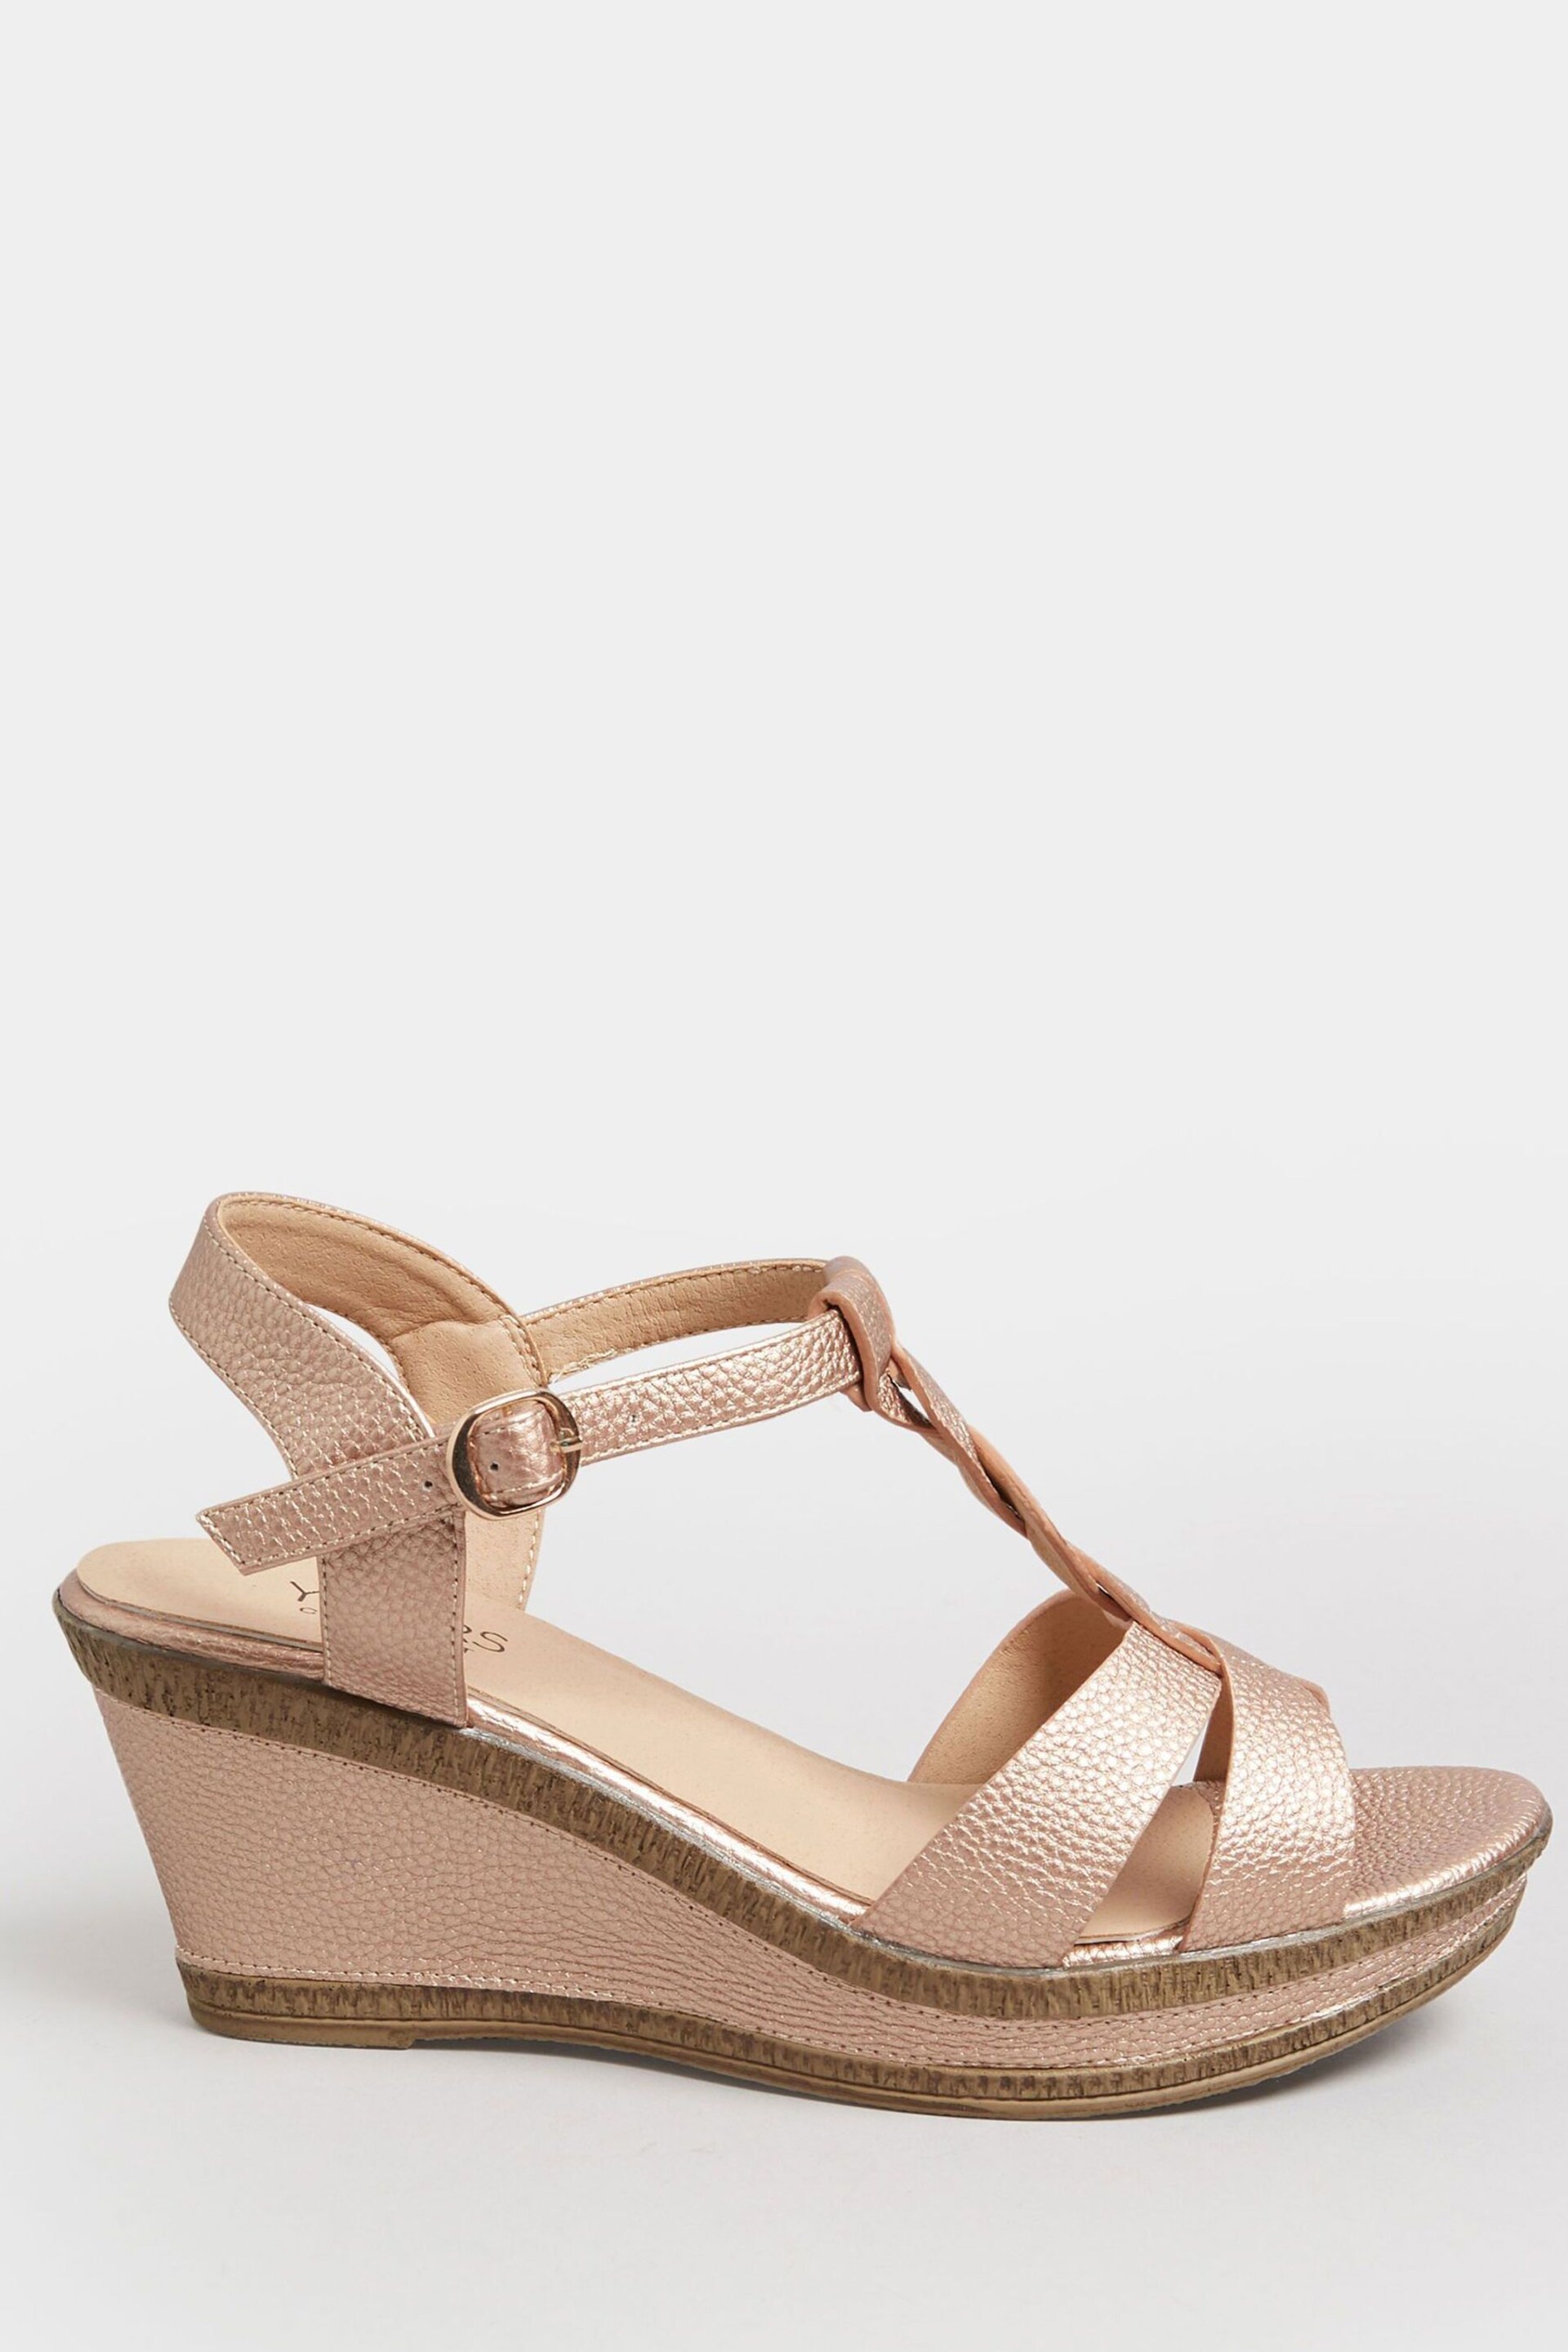 Yours Curve Gold Extra Wide Fit Cross Strap Wedges Heels - Image 1 of 5